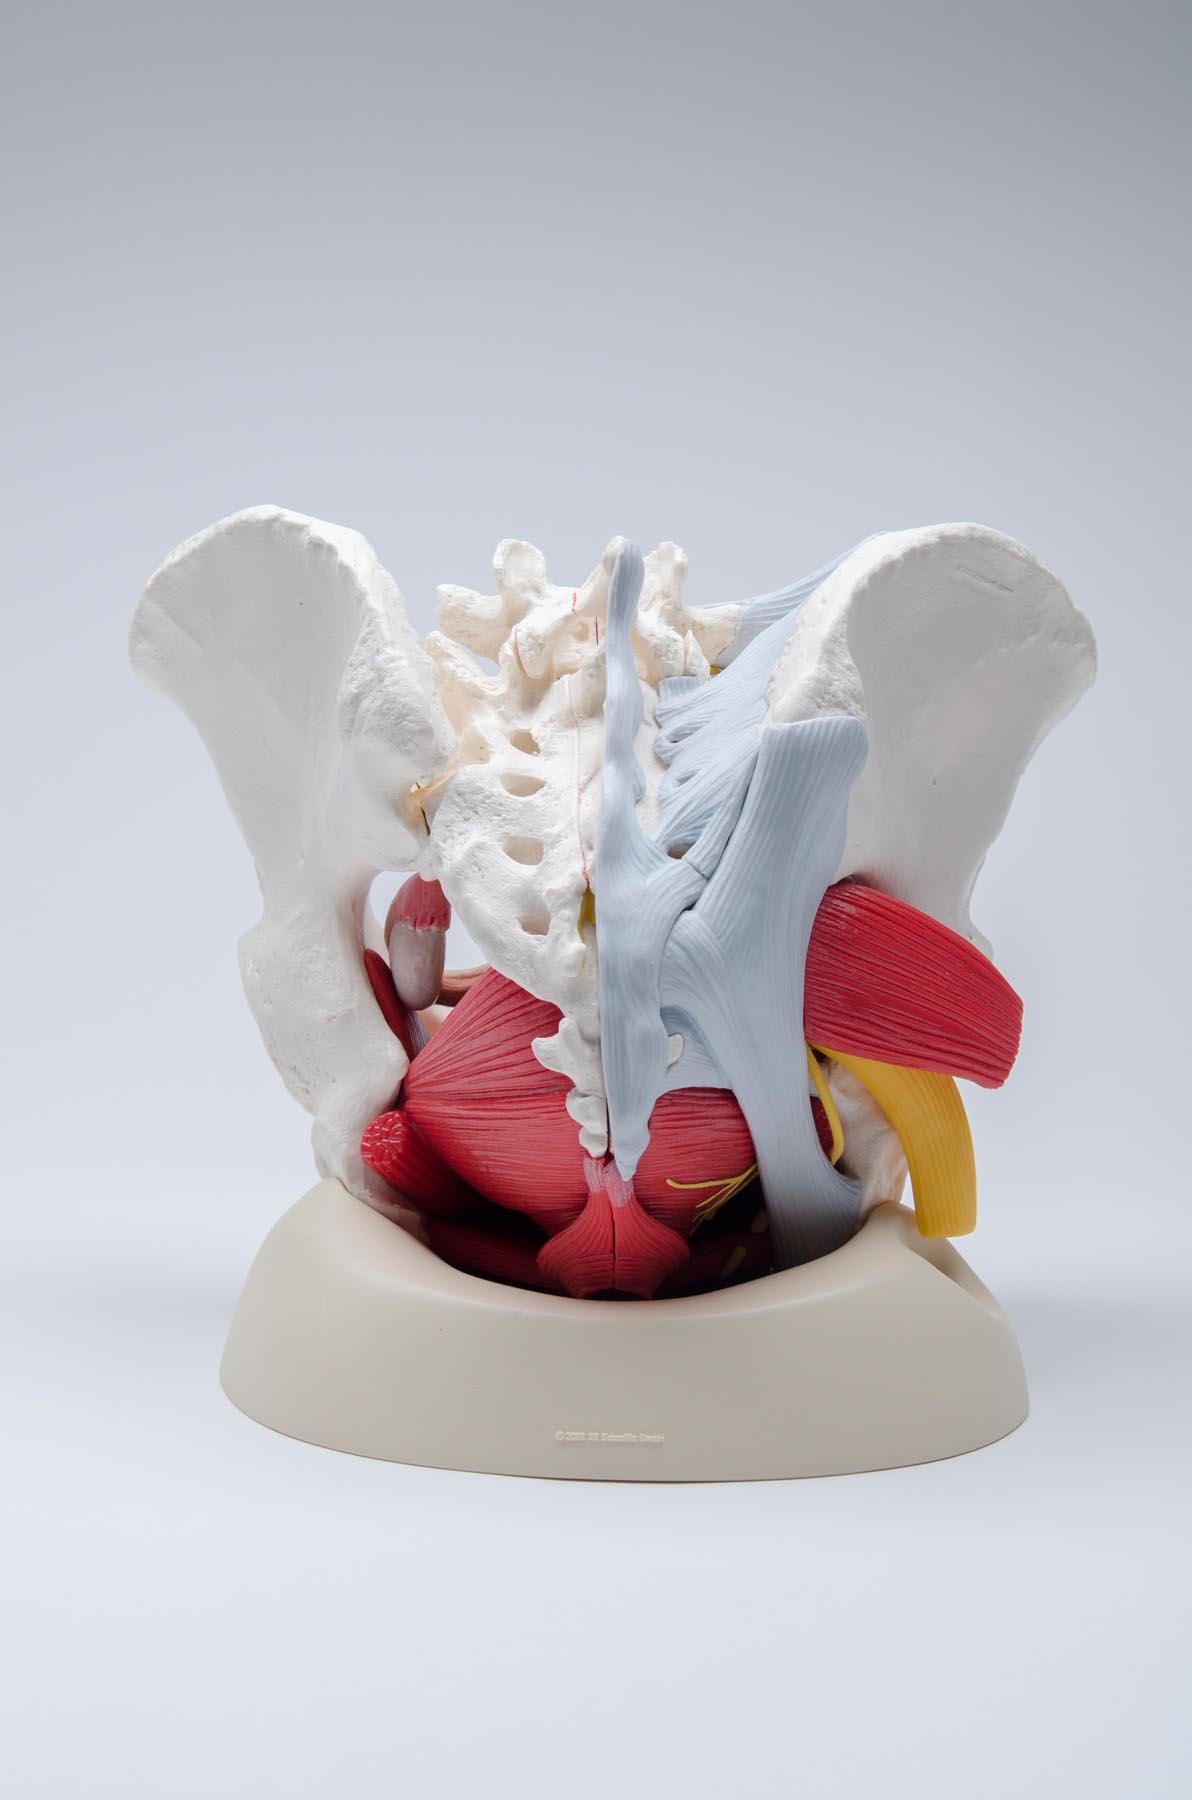 Axis Scientific Anatomy Model of Female Pelvis, Pelvic Floor Muscles and  Reproductive Organs | Removable Organs Include Uterus, Colon and Bladder 